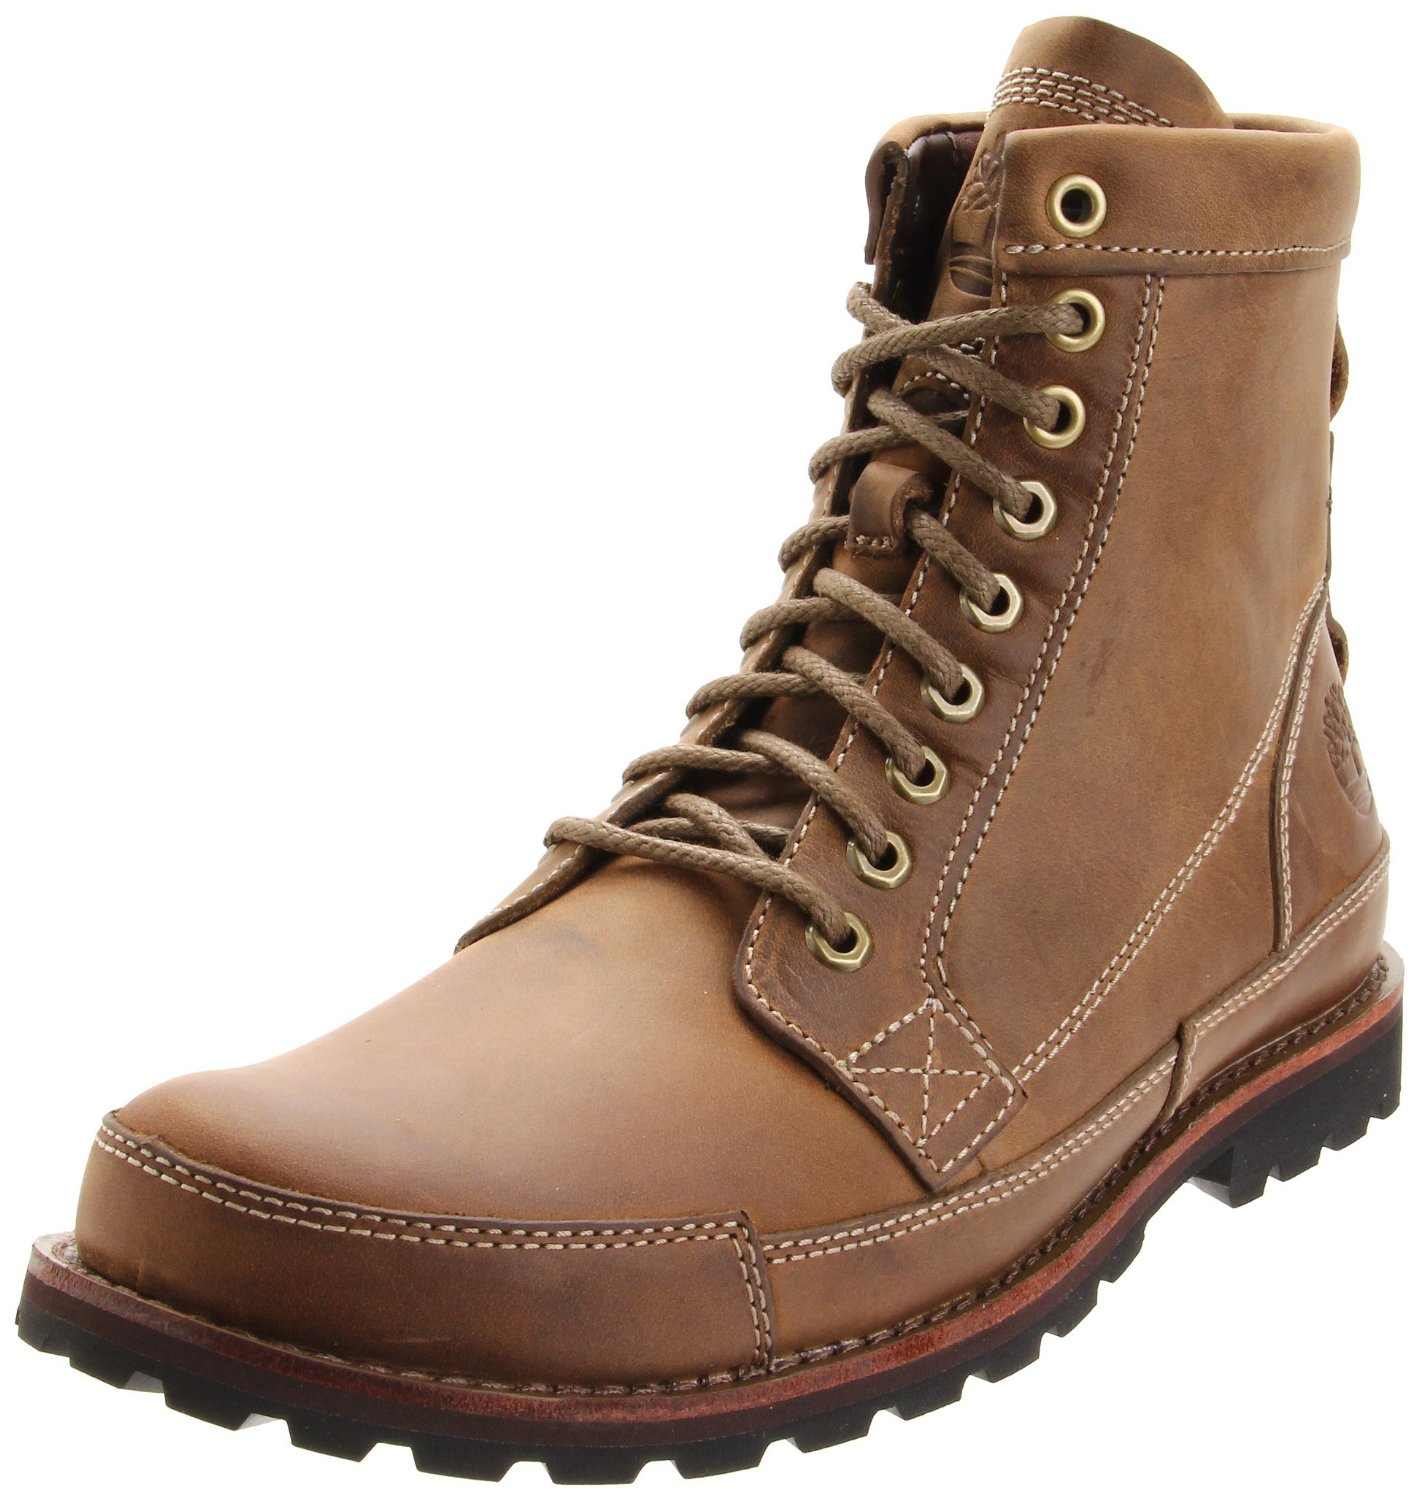 Hiking, Journey & Adventure: Timberland Men's Earthkeepers 6" Lace-Up Boot